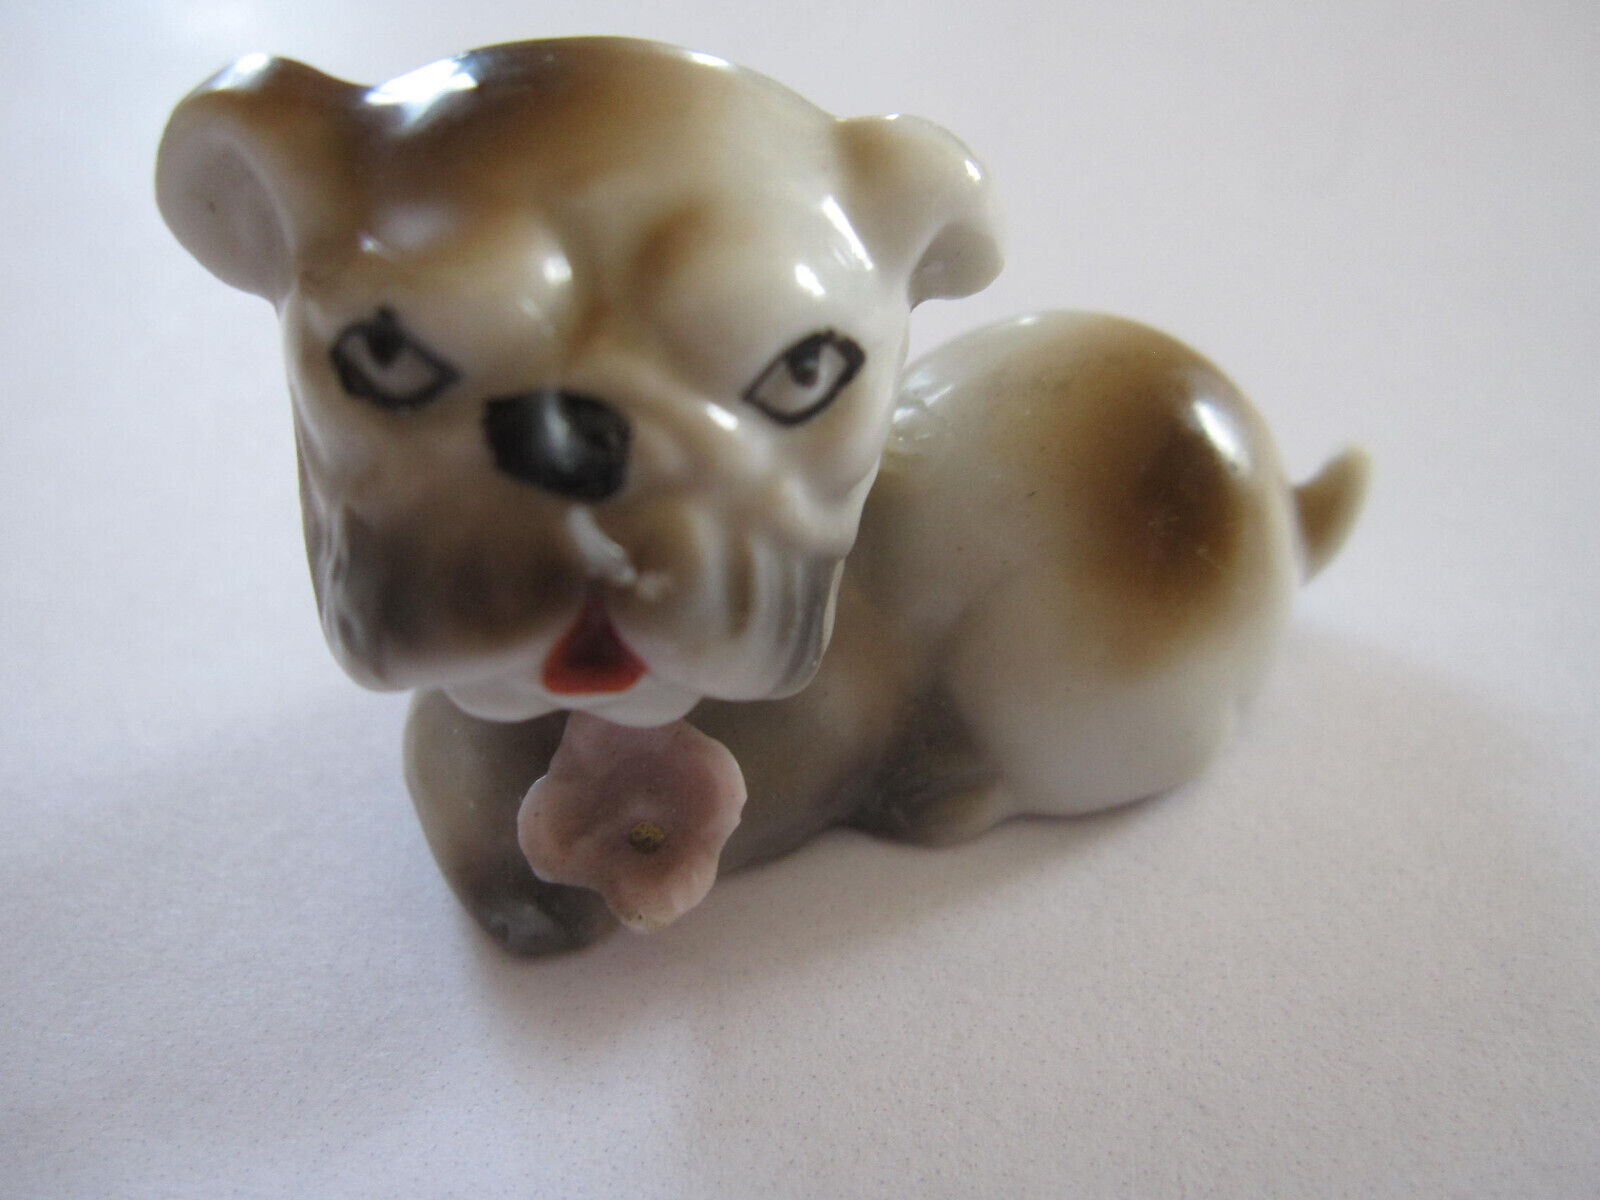 Vintage Japan Bulldog Puppy Porcelain Figurine - Handpainted and Marked